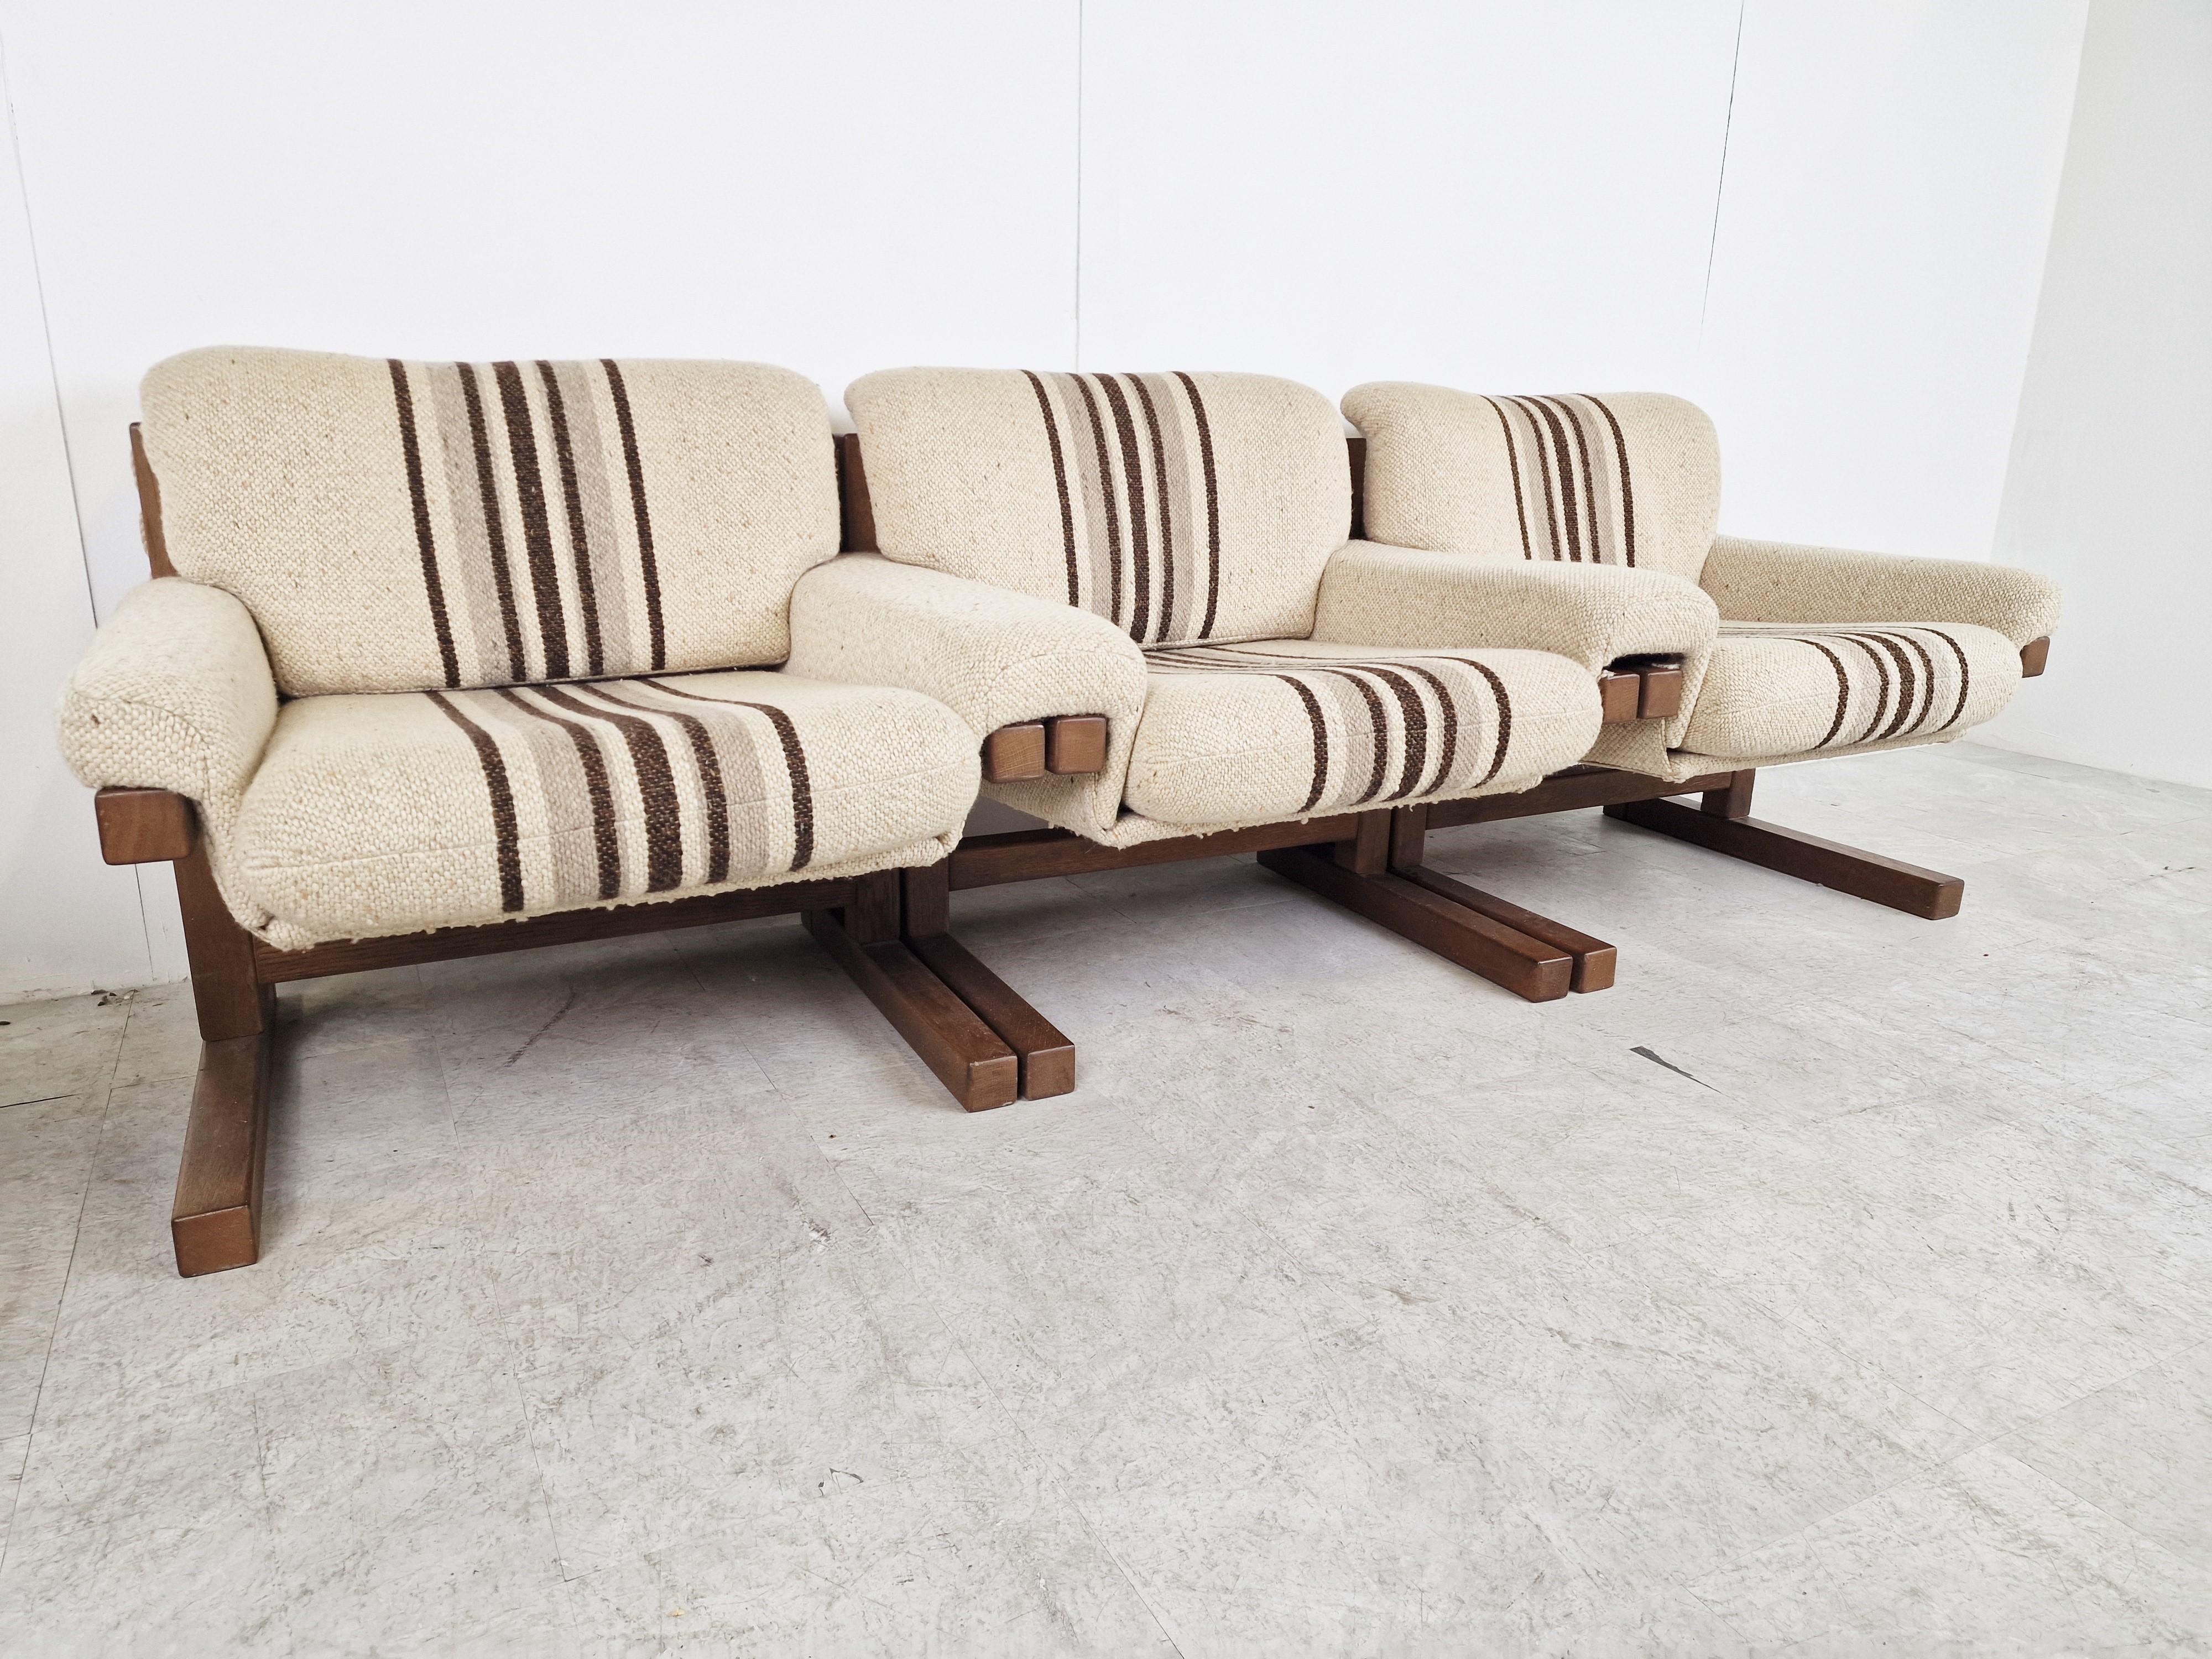 Mid century seventies sofa set.

The sets consists of a three seater bench and a armchair all upholstered in their original 1970s fabric.

Very good condition.

Nice sturdy and brutalist design with cords and canvas.

1970s -